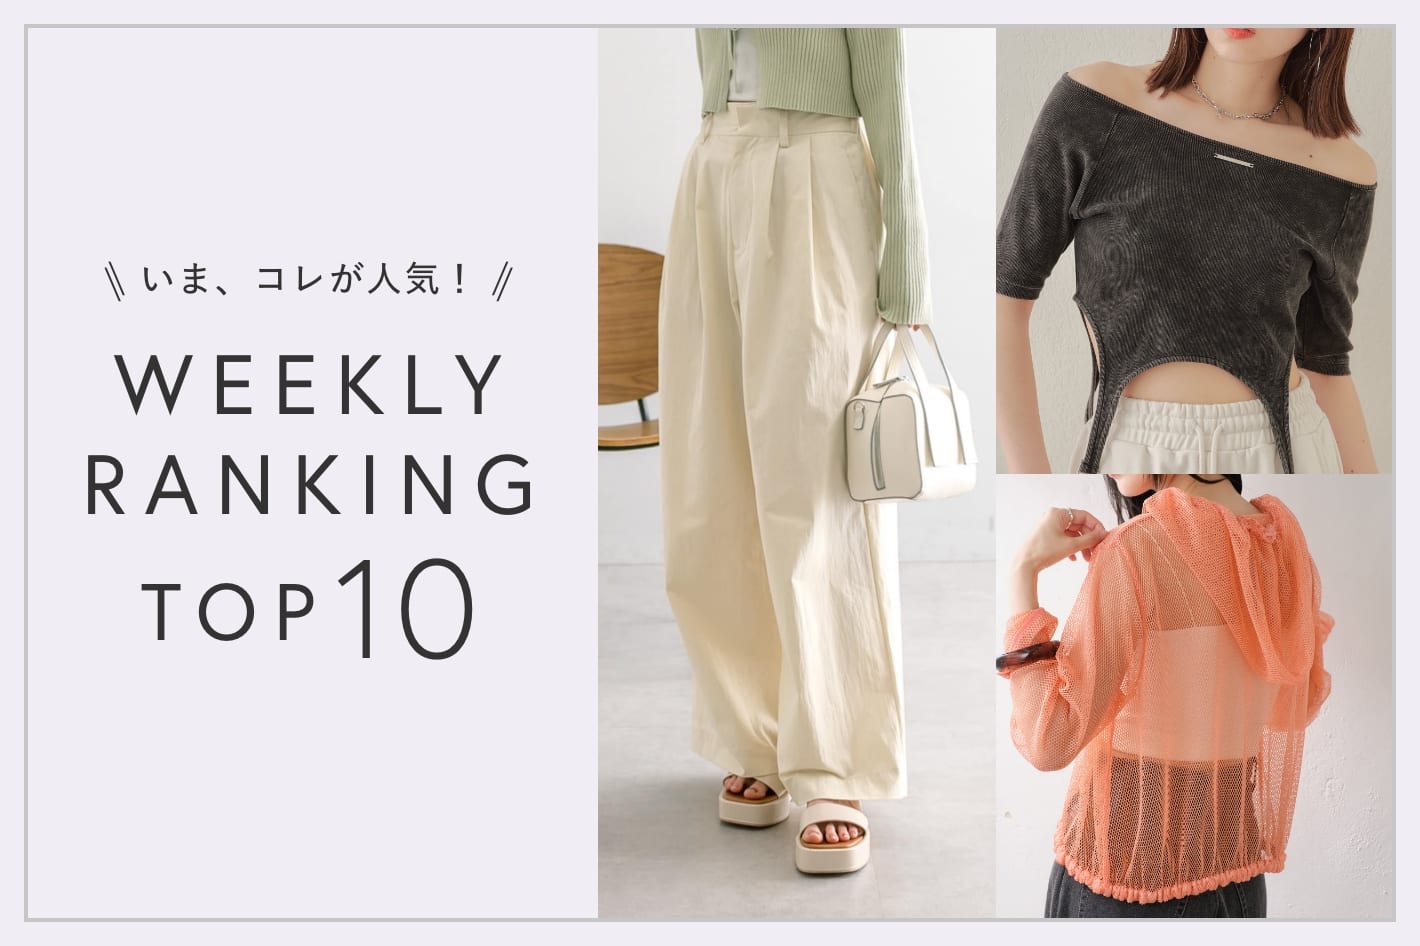 OUTLET いま、これが人気！WEEKLY RANKING TOP10！【7/9更新】